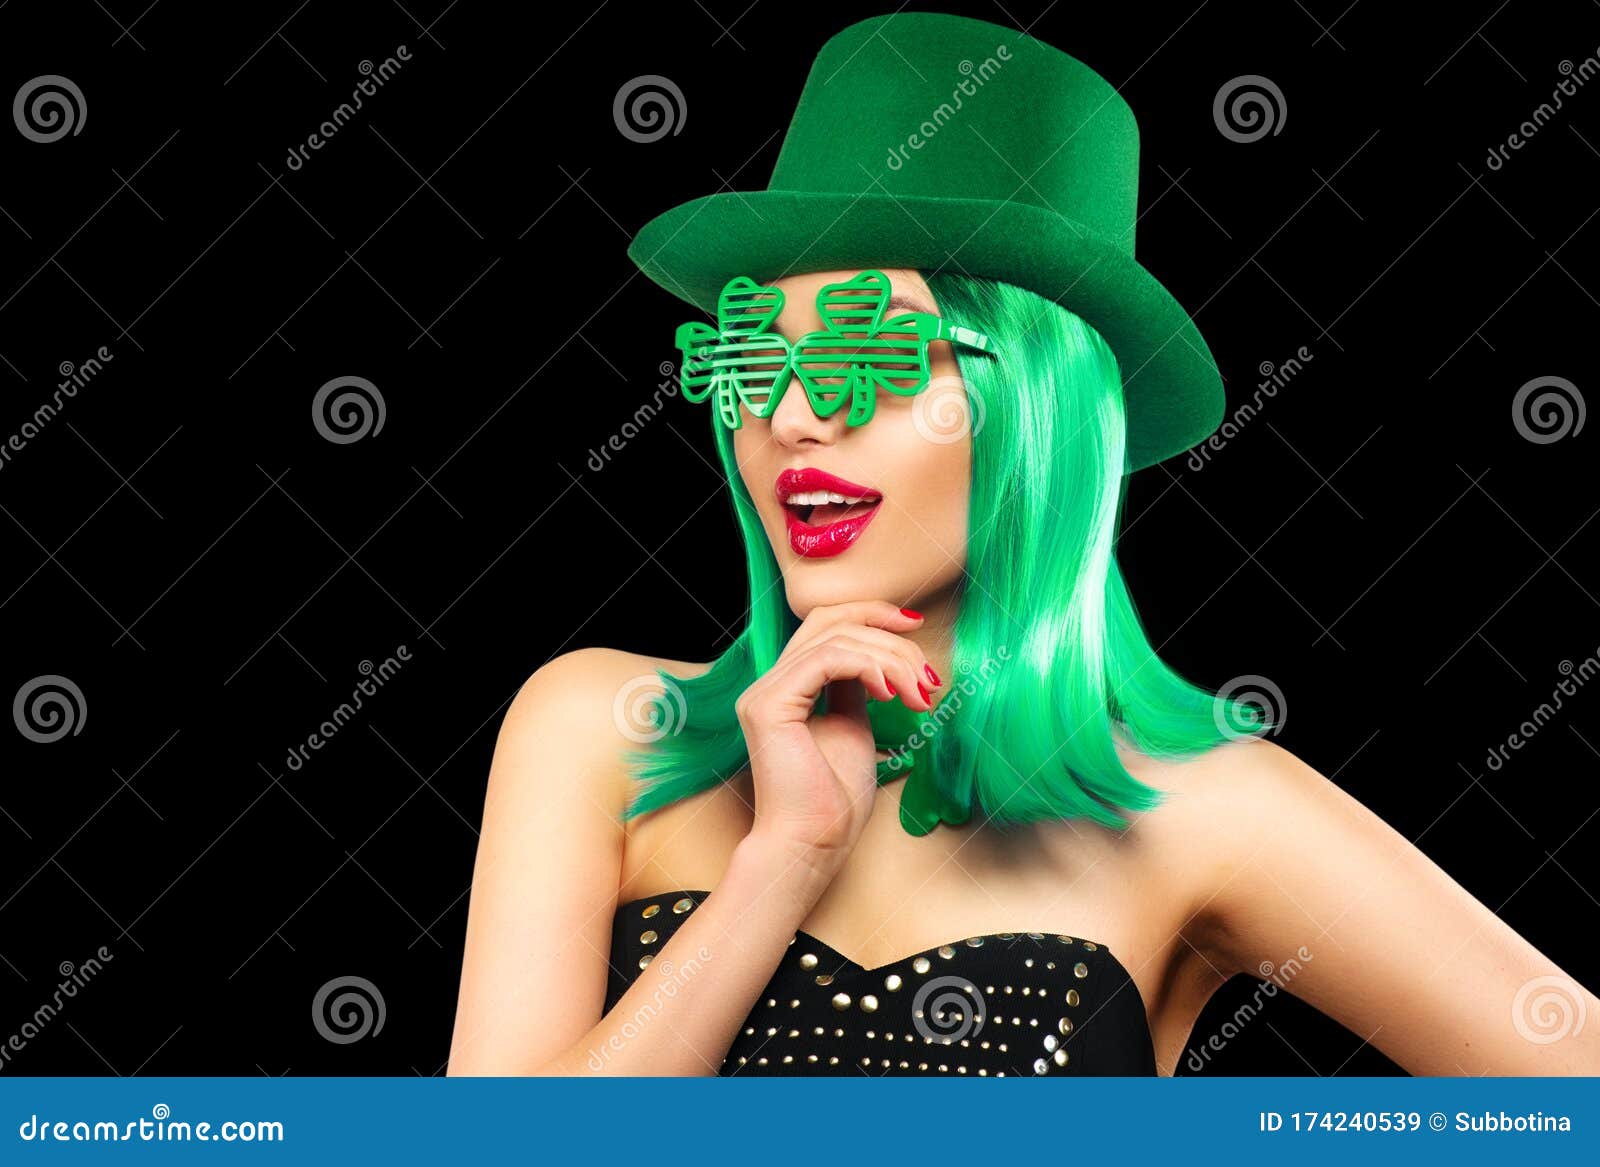 sexy st patricks day pictures